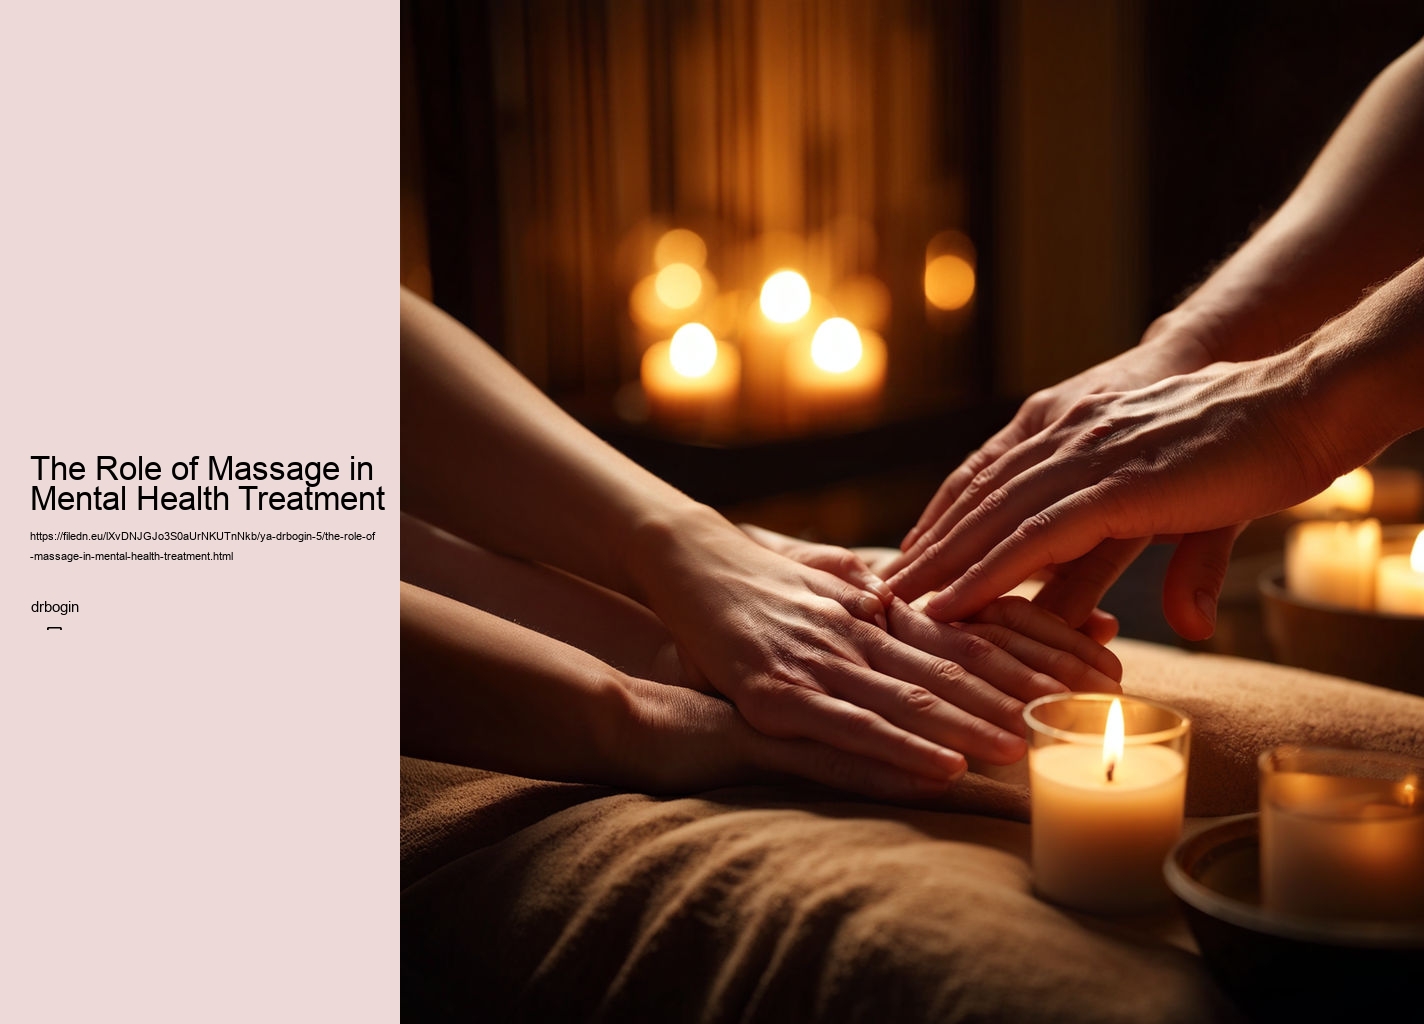 The Role of Massage in Mental Health Treatment